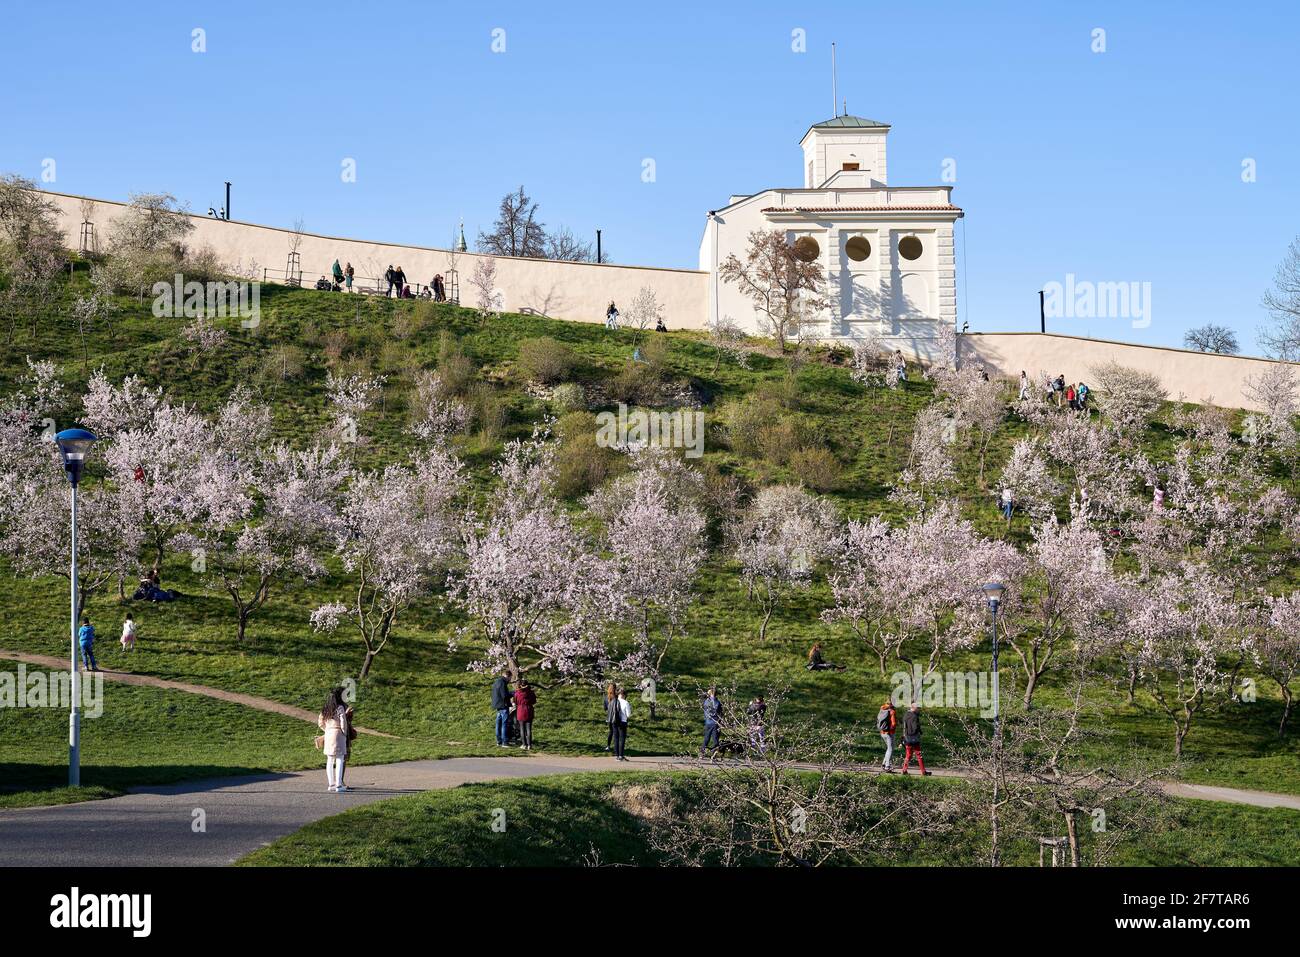 PRAGUE, CZECH REPUBLIC - APRIL 4, 2020: Schonbornska garden with blooming trees, people walking around and the U.S. Embassy in the background Stock Photo